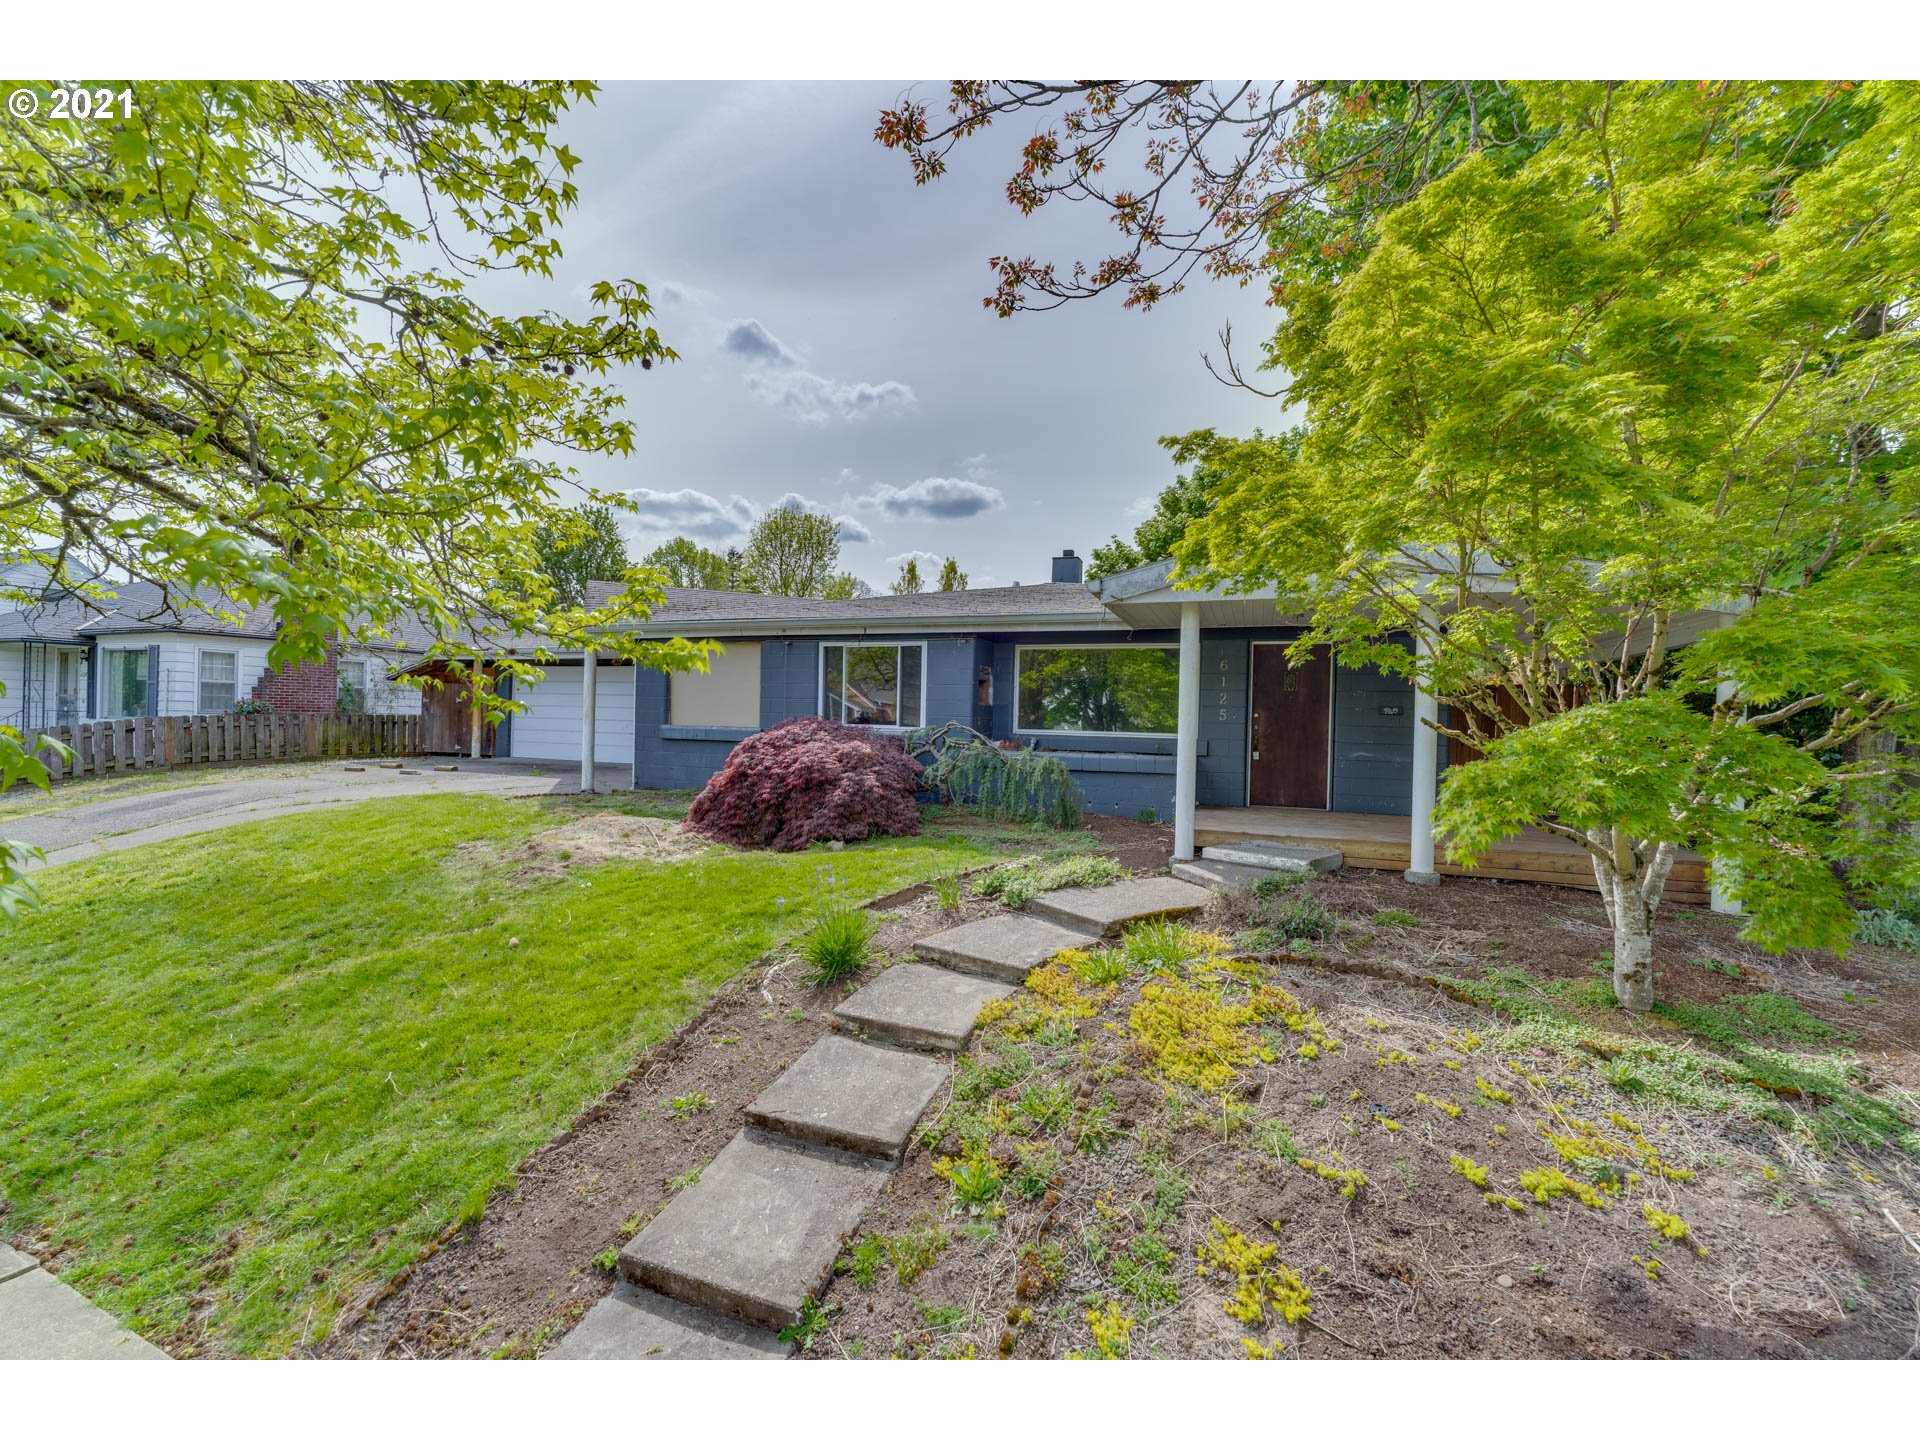 6125 SE 23RD AVE (1 of 20)